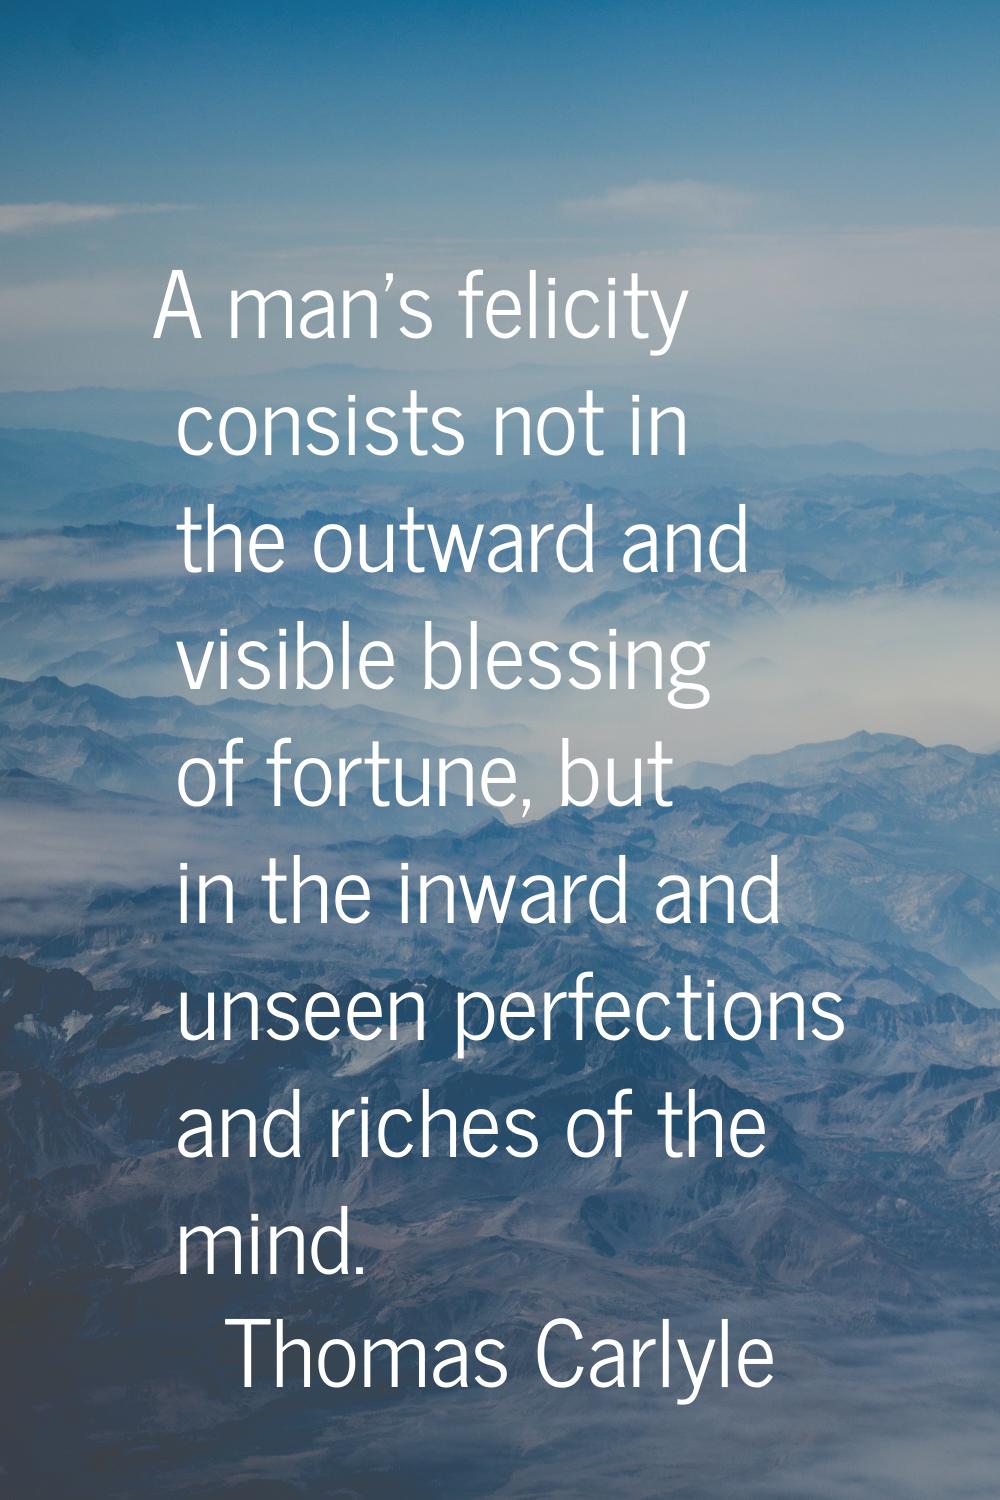 A man's felicity consists not in the outward and visible blessing of fortune, but in the inward and